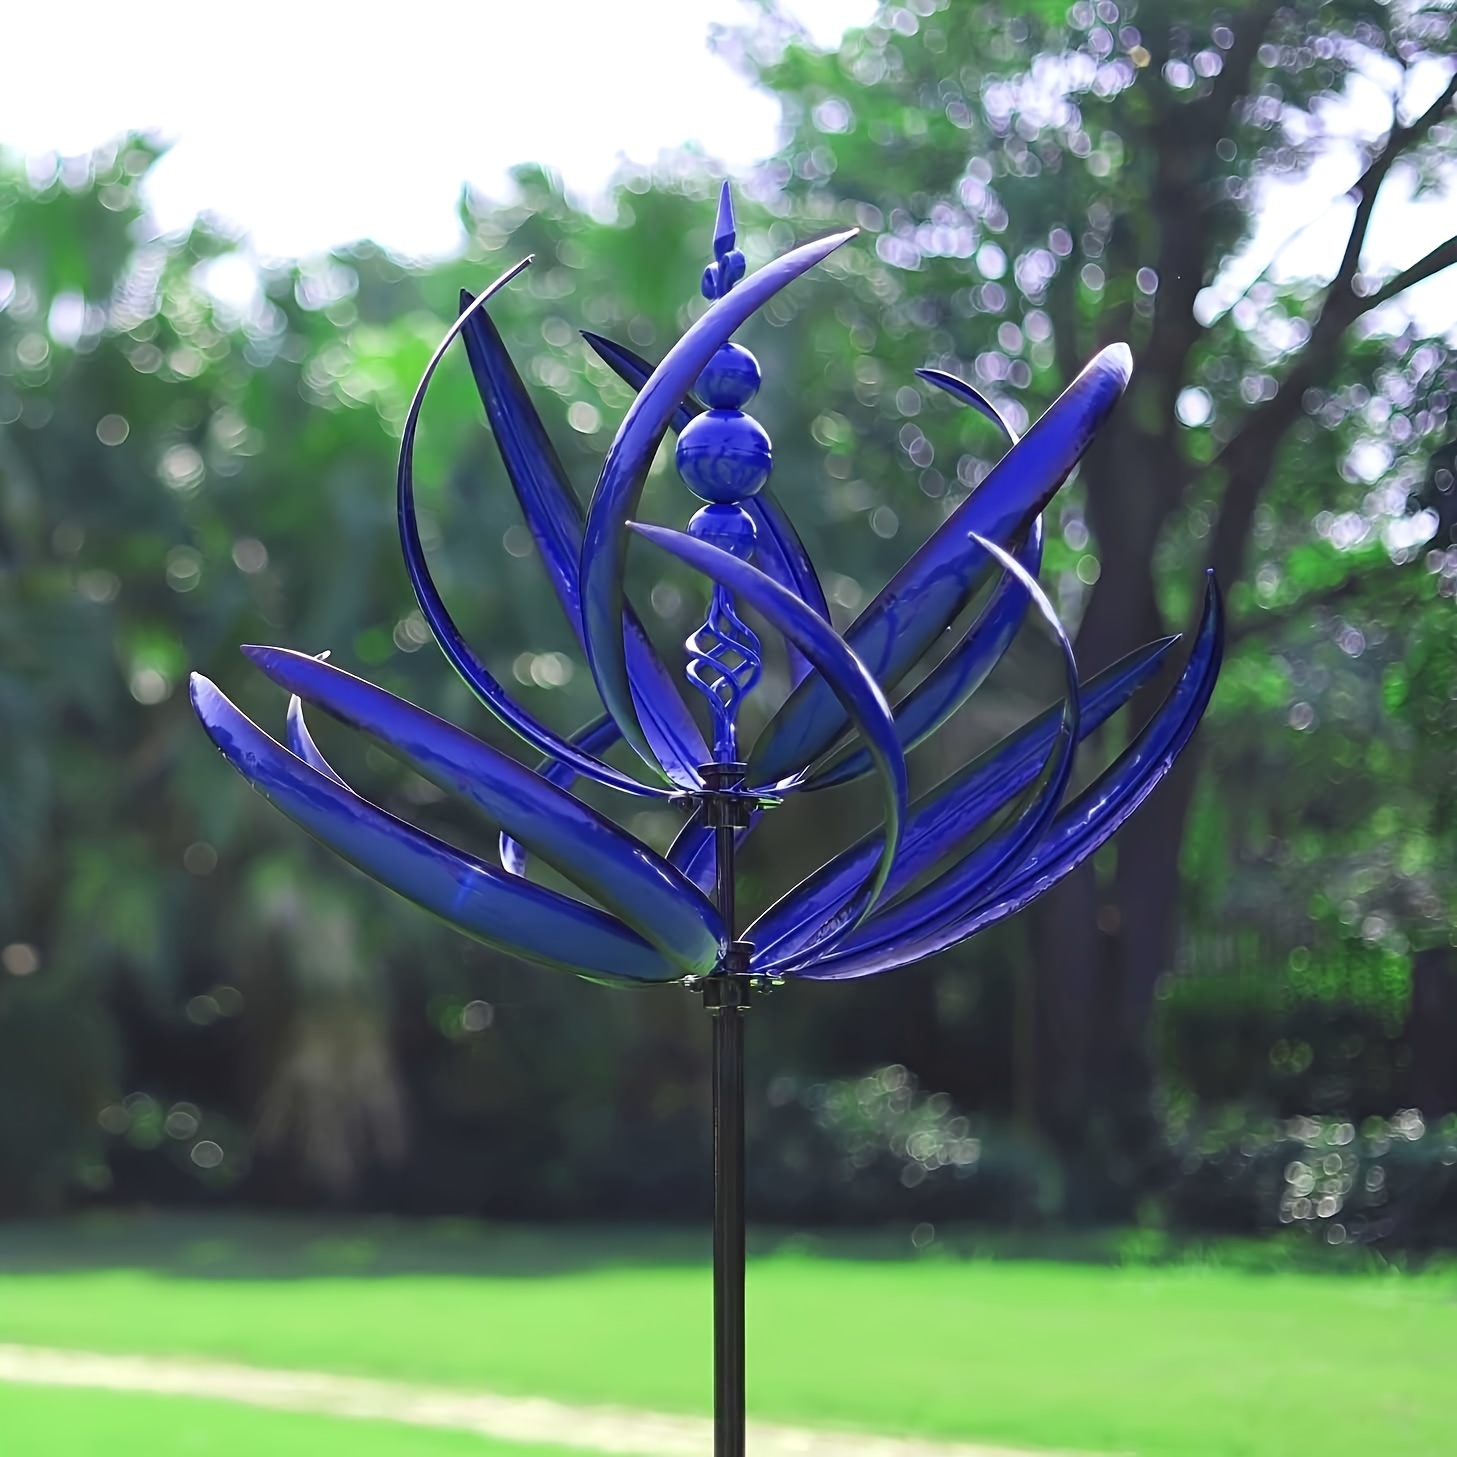 

Extra Large 3d Metal Windmill Spinner - Blue Outdoor Garden Art With Stake, Perfect For Yard & Lawn Decor